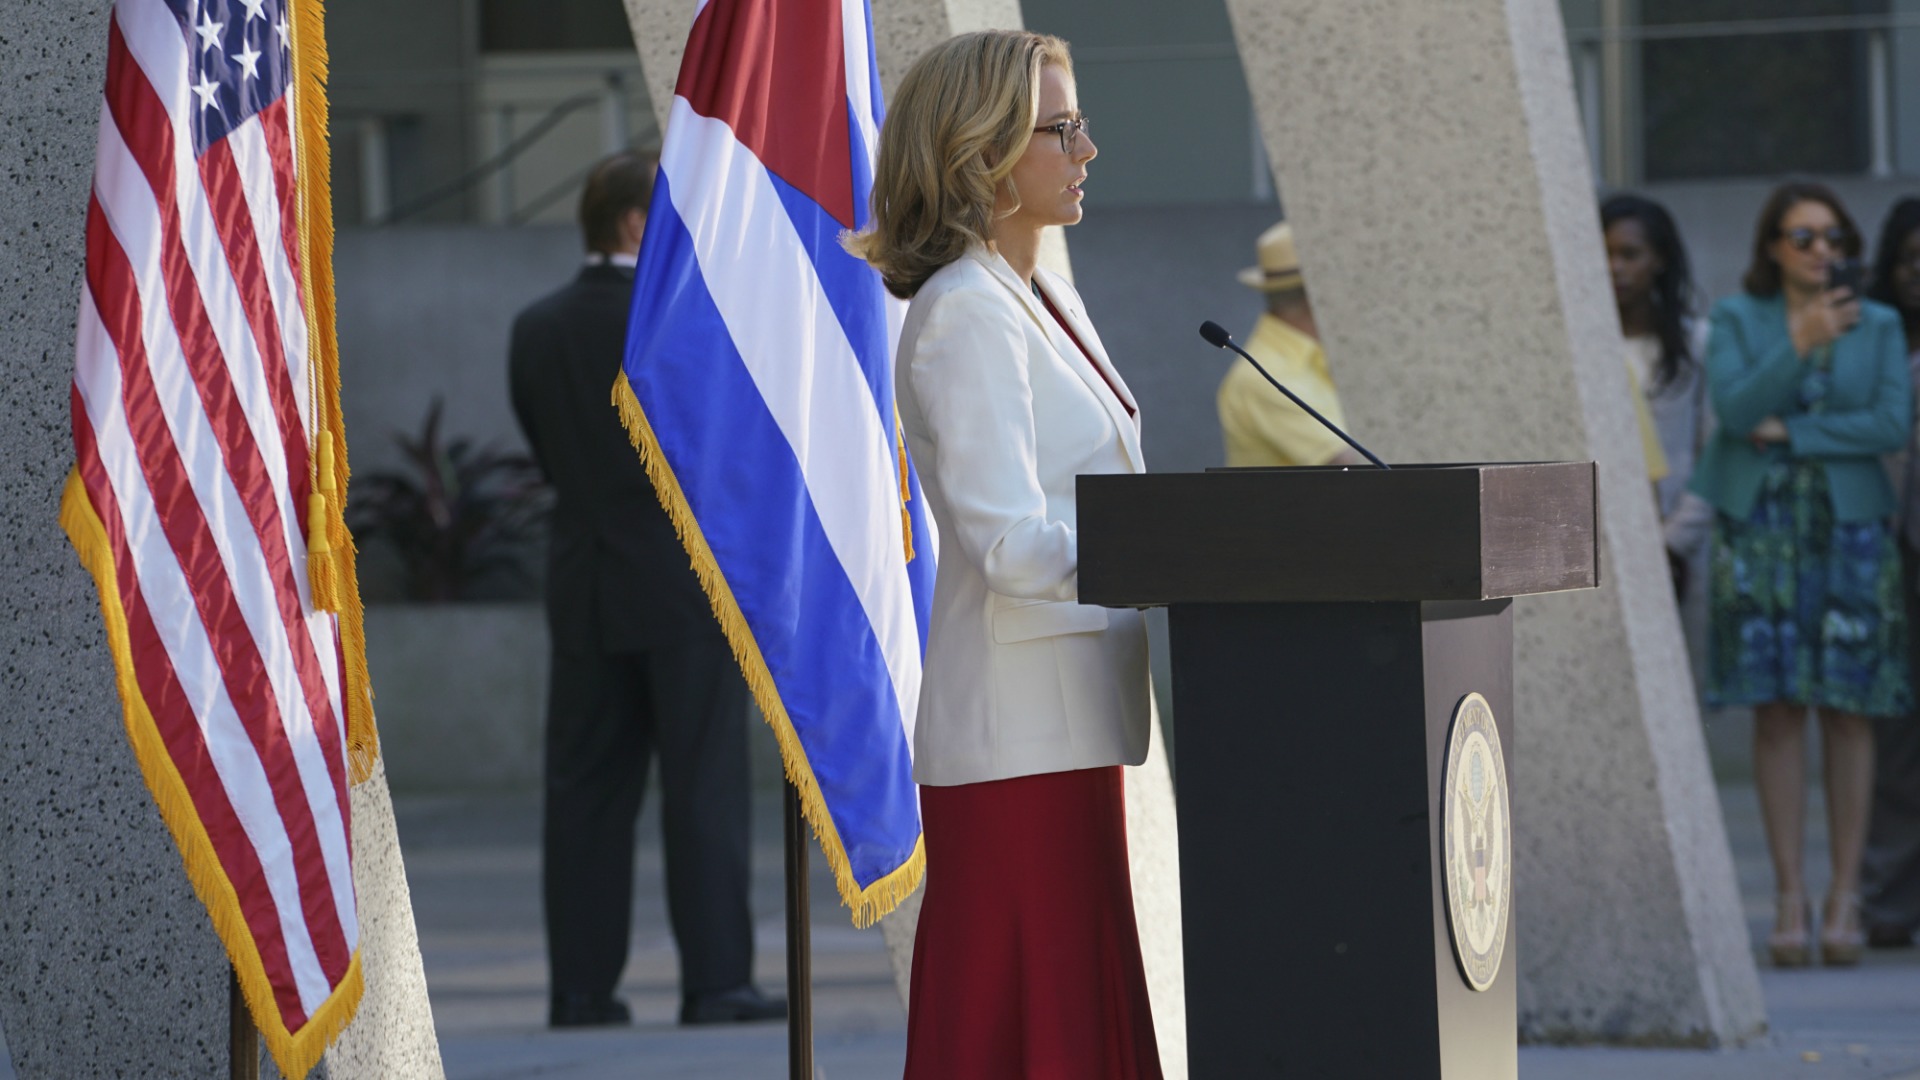 Bess made history by reopening the U.S. embassy in Cuba.